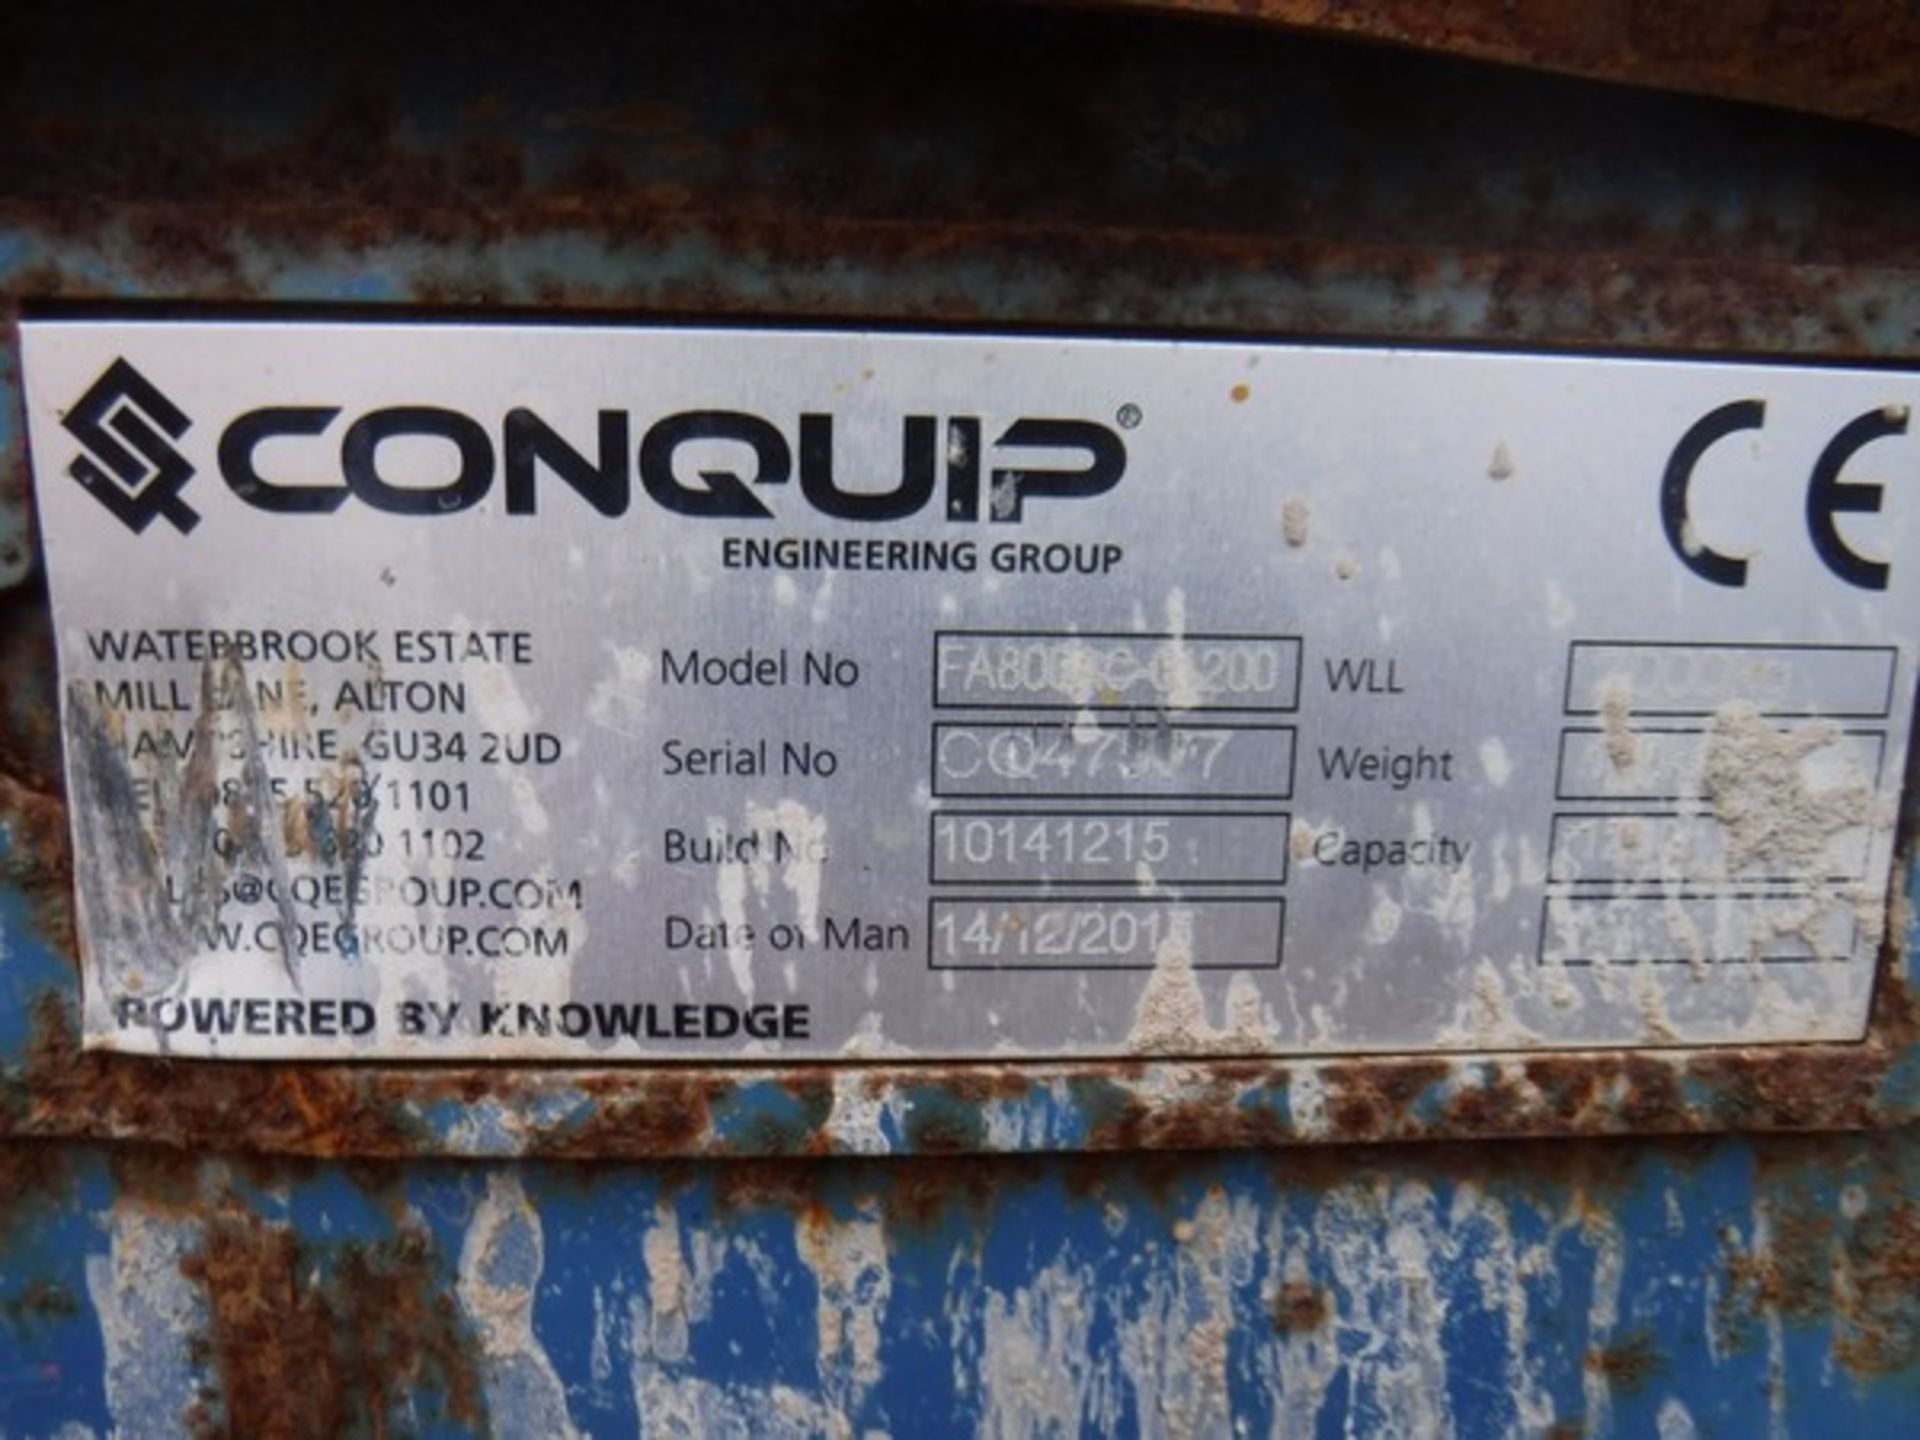 2015 CONQUIP 1200ltr tipping skips x 2 S/N CQ45589 & CQ47577 - Image 6 of 6